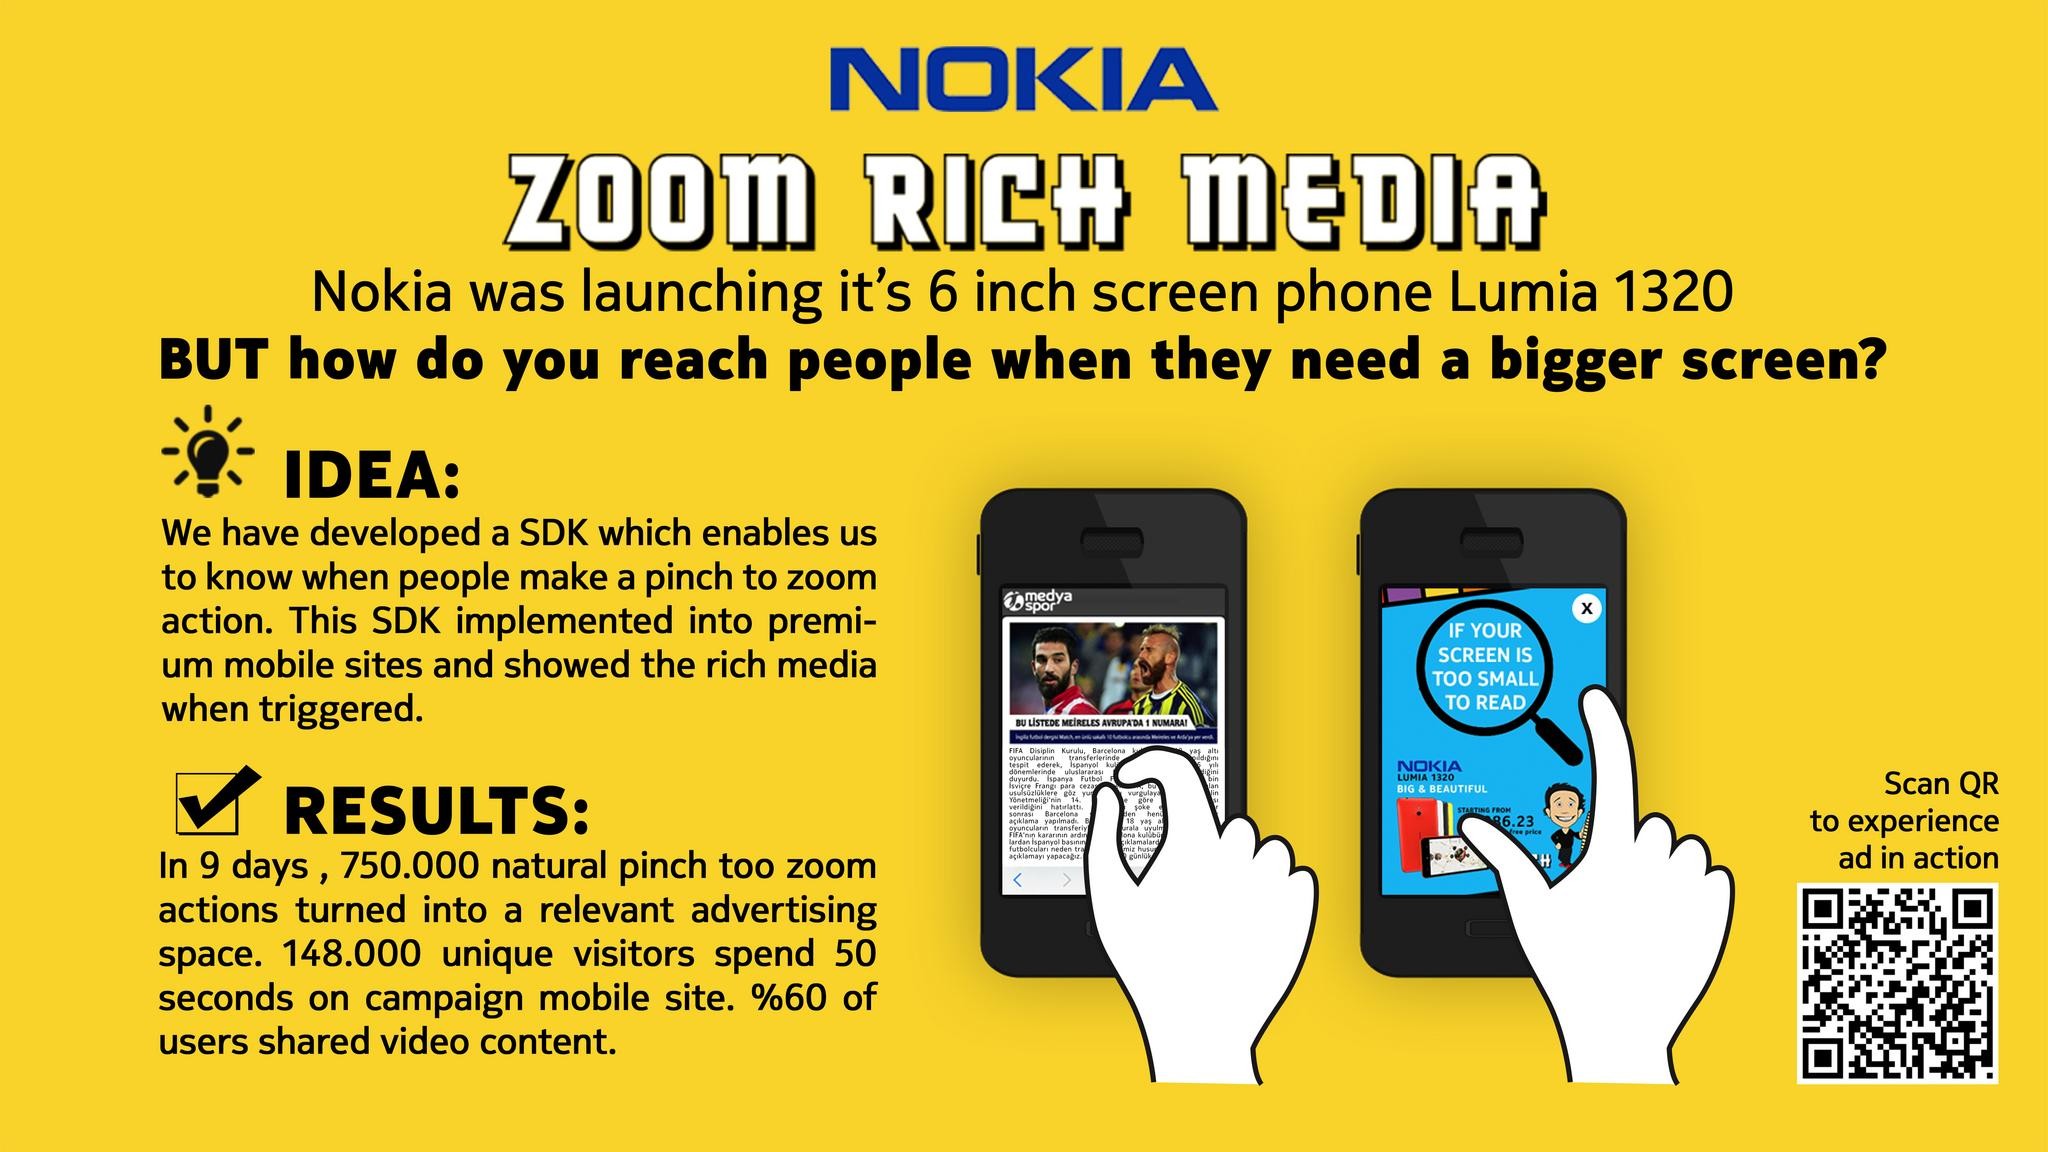 ZOOM RICH MEDIA FOR 6 INCH NOKIA